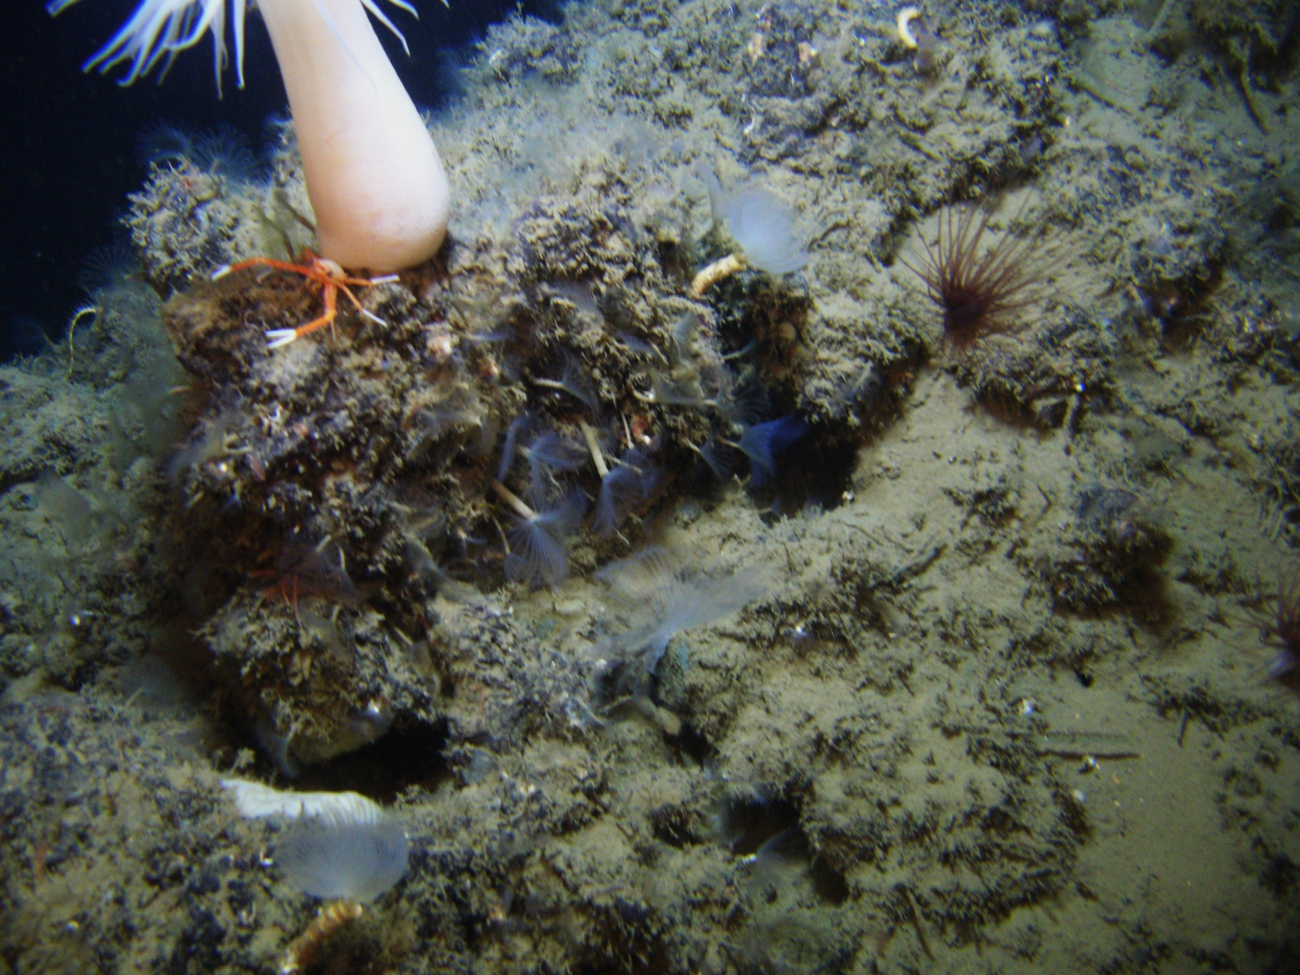 An outcrop with numerous tube worms with feeding tentaclesextended, a large white anemone, a brown cerianthid anemone, and anorange and white squat lobster